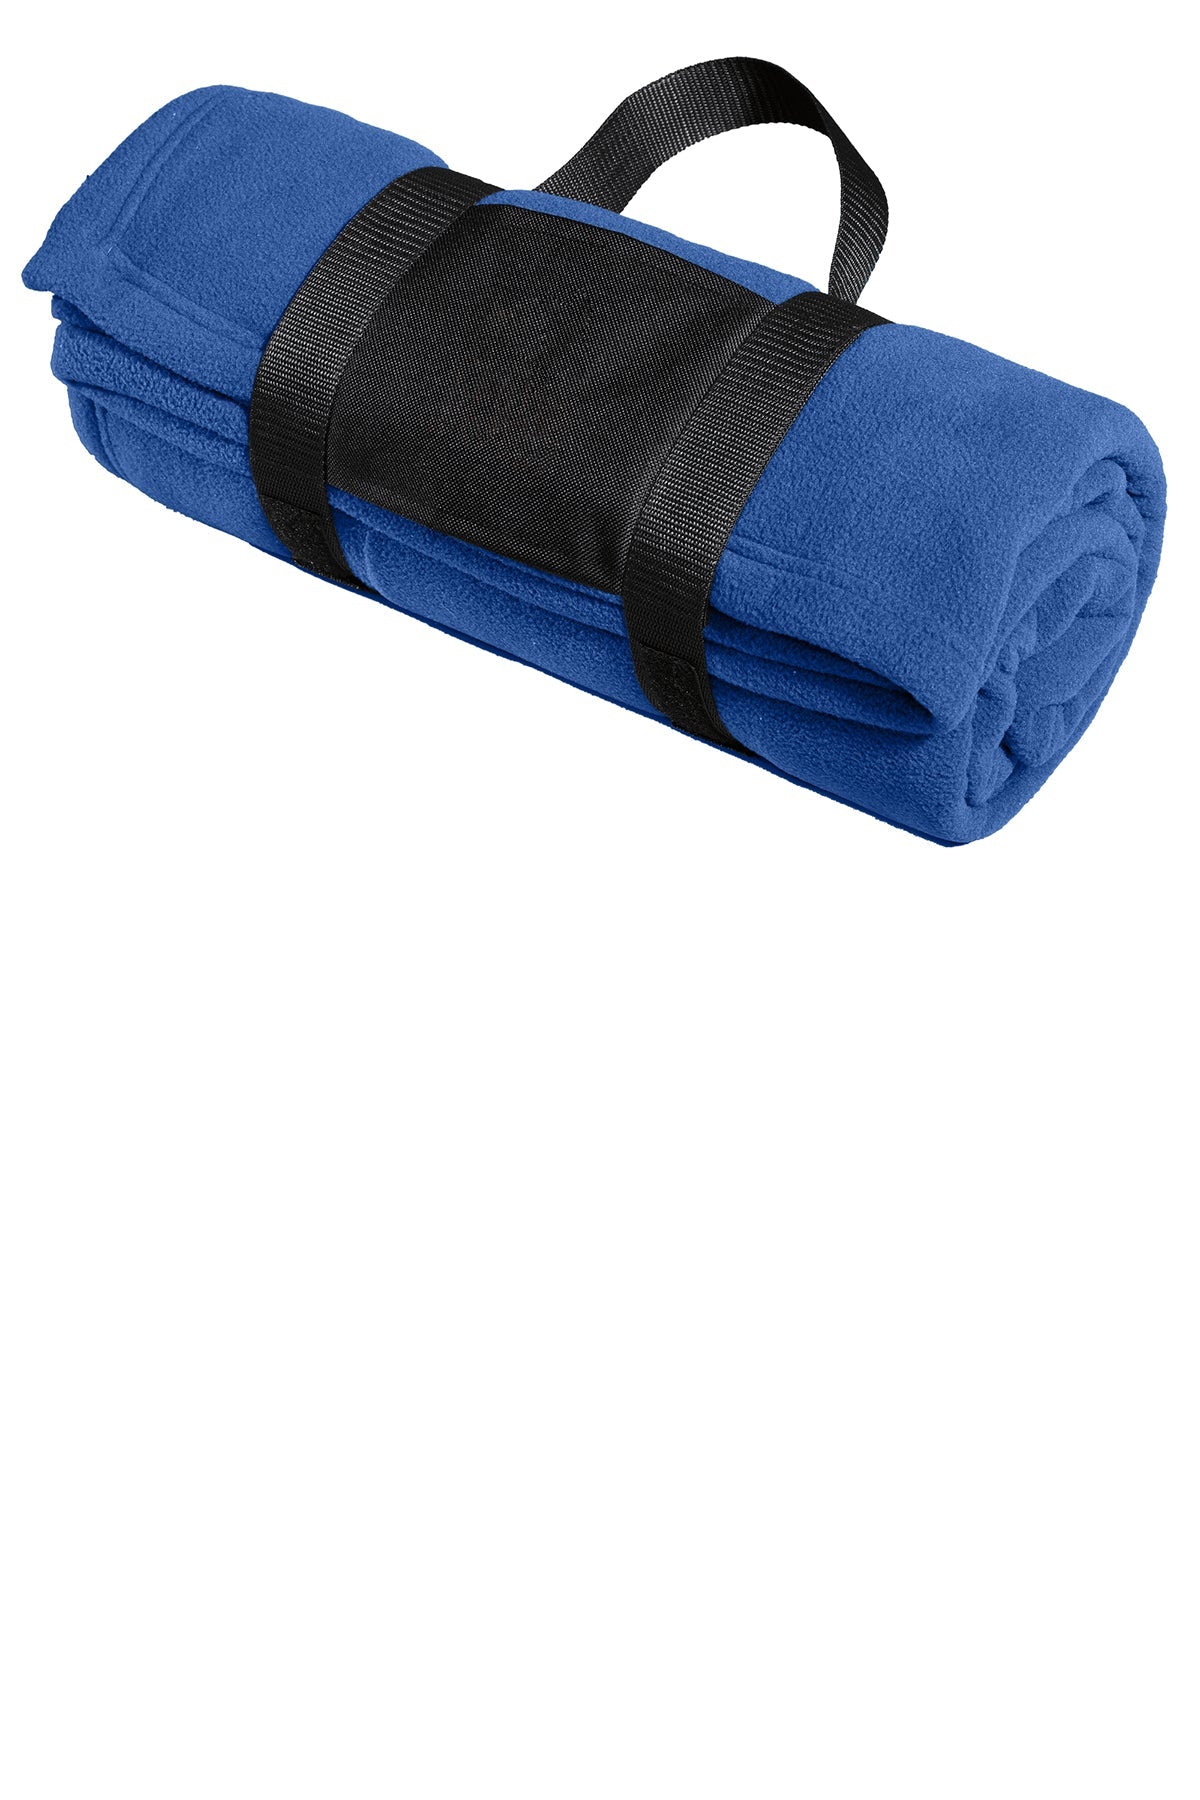 Port Authority Fleece Branded Blankets with Carrying Strap, True Royal